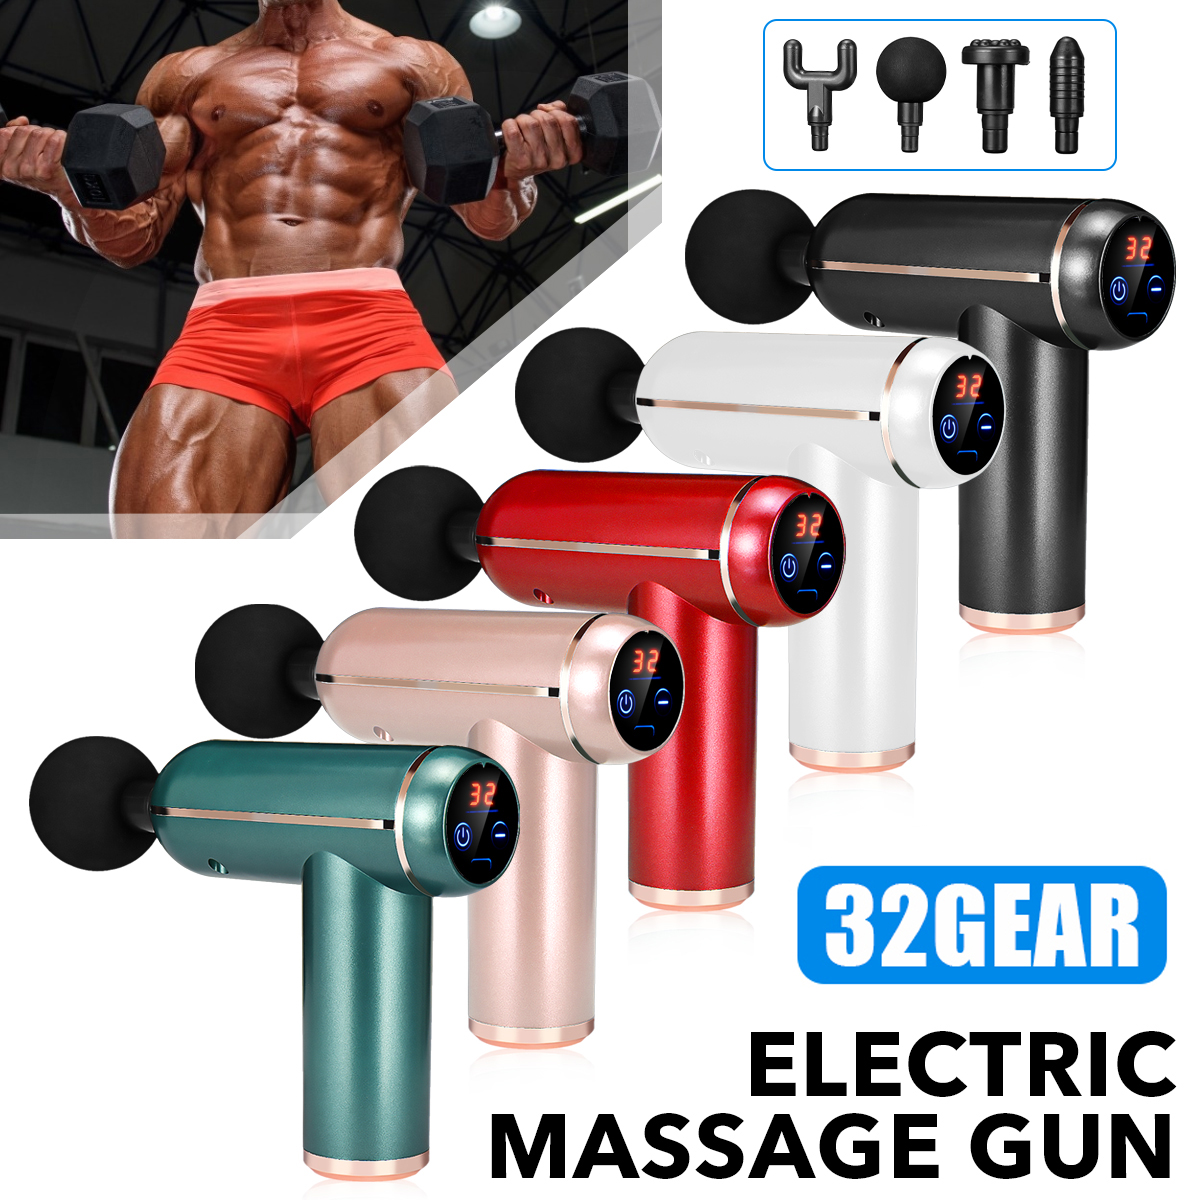 632-Gears-Electric-Percussion-Massage-Guns-Deep-Tissue-Relaxing-Muscle-Vibration-Massager-Pain-Relie-1874517-1